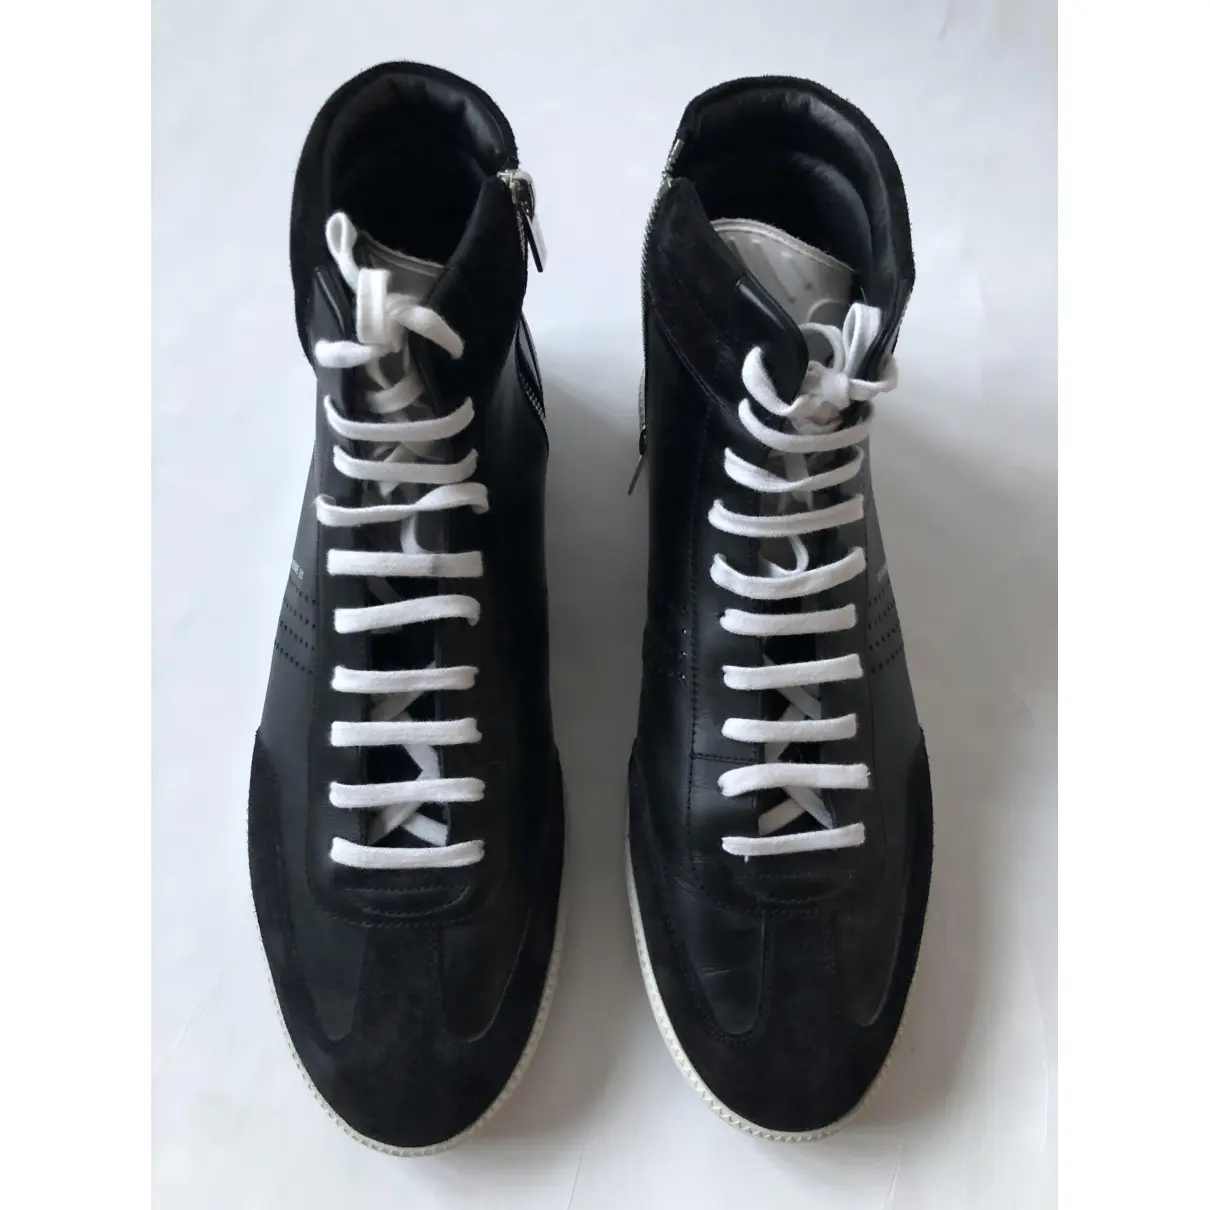 Buy Dior Homme B01 leather high trainers online